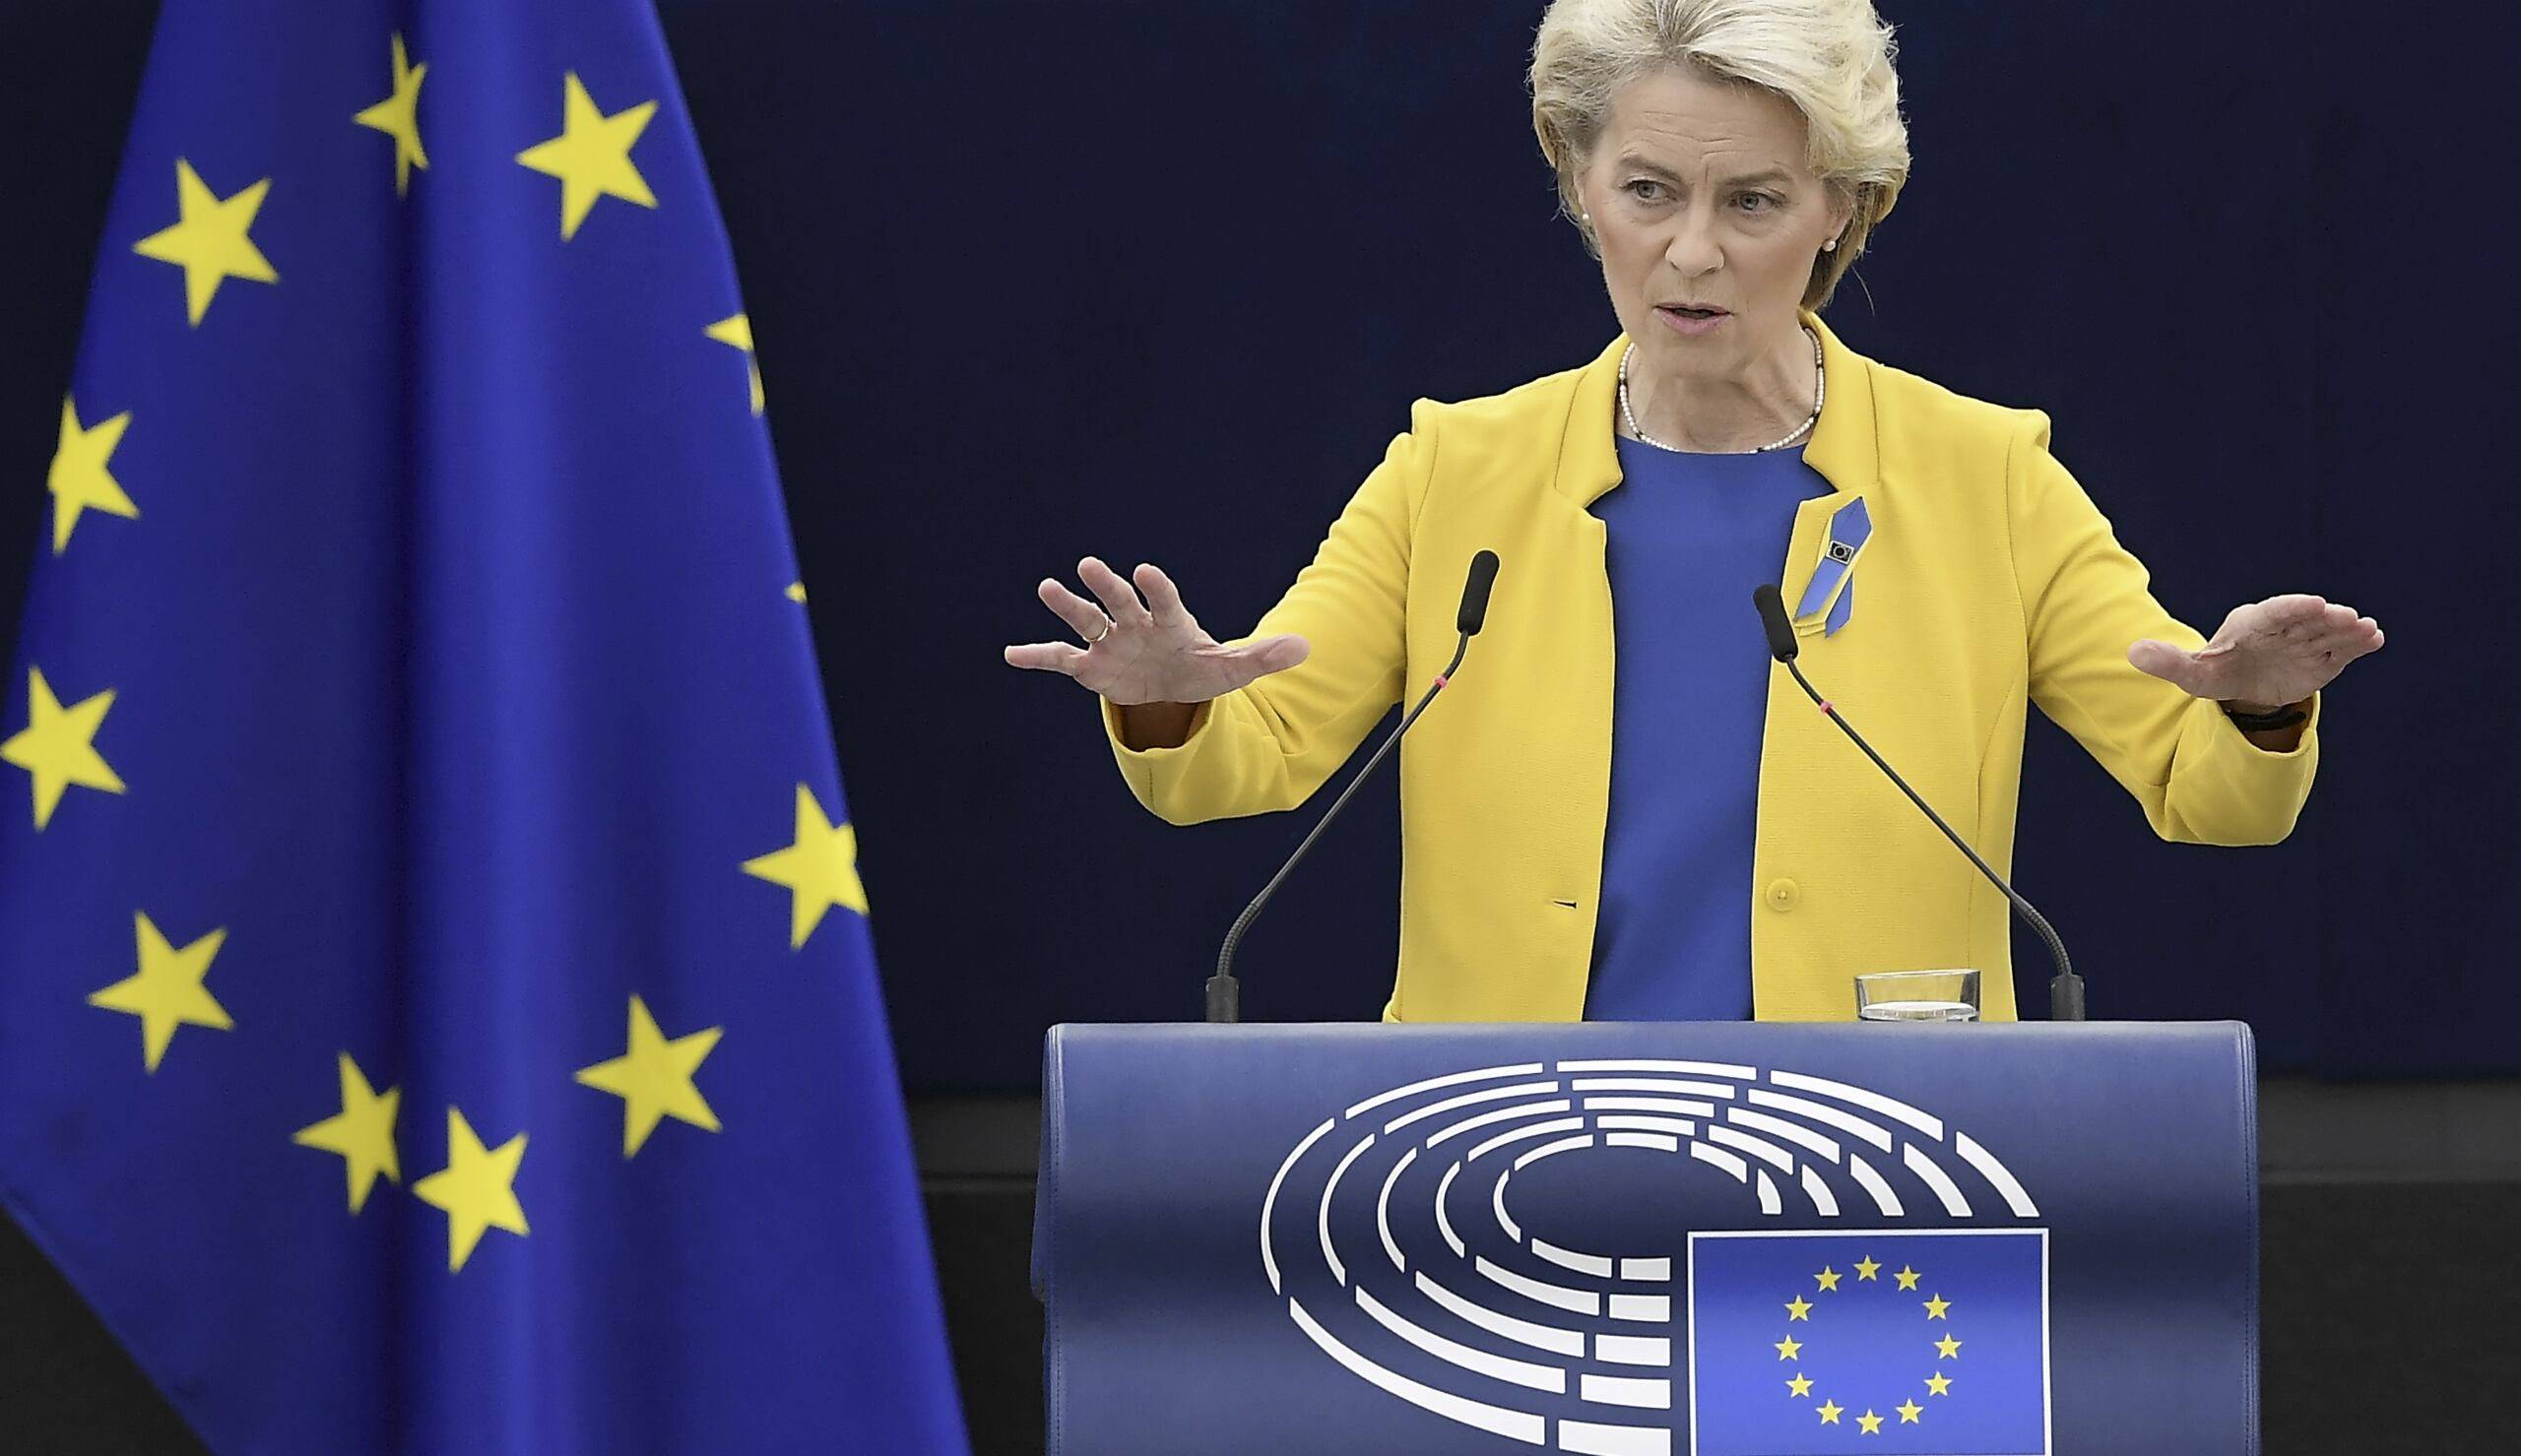 European Commission President Ursula von der Leyen delivers a speech during a debate on "The State of the European Union" as part of a plenary session in Strasbourg, eastern France, on September 14, 2022. (Photo by Frederick FLORIN / AFP)